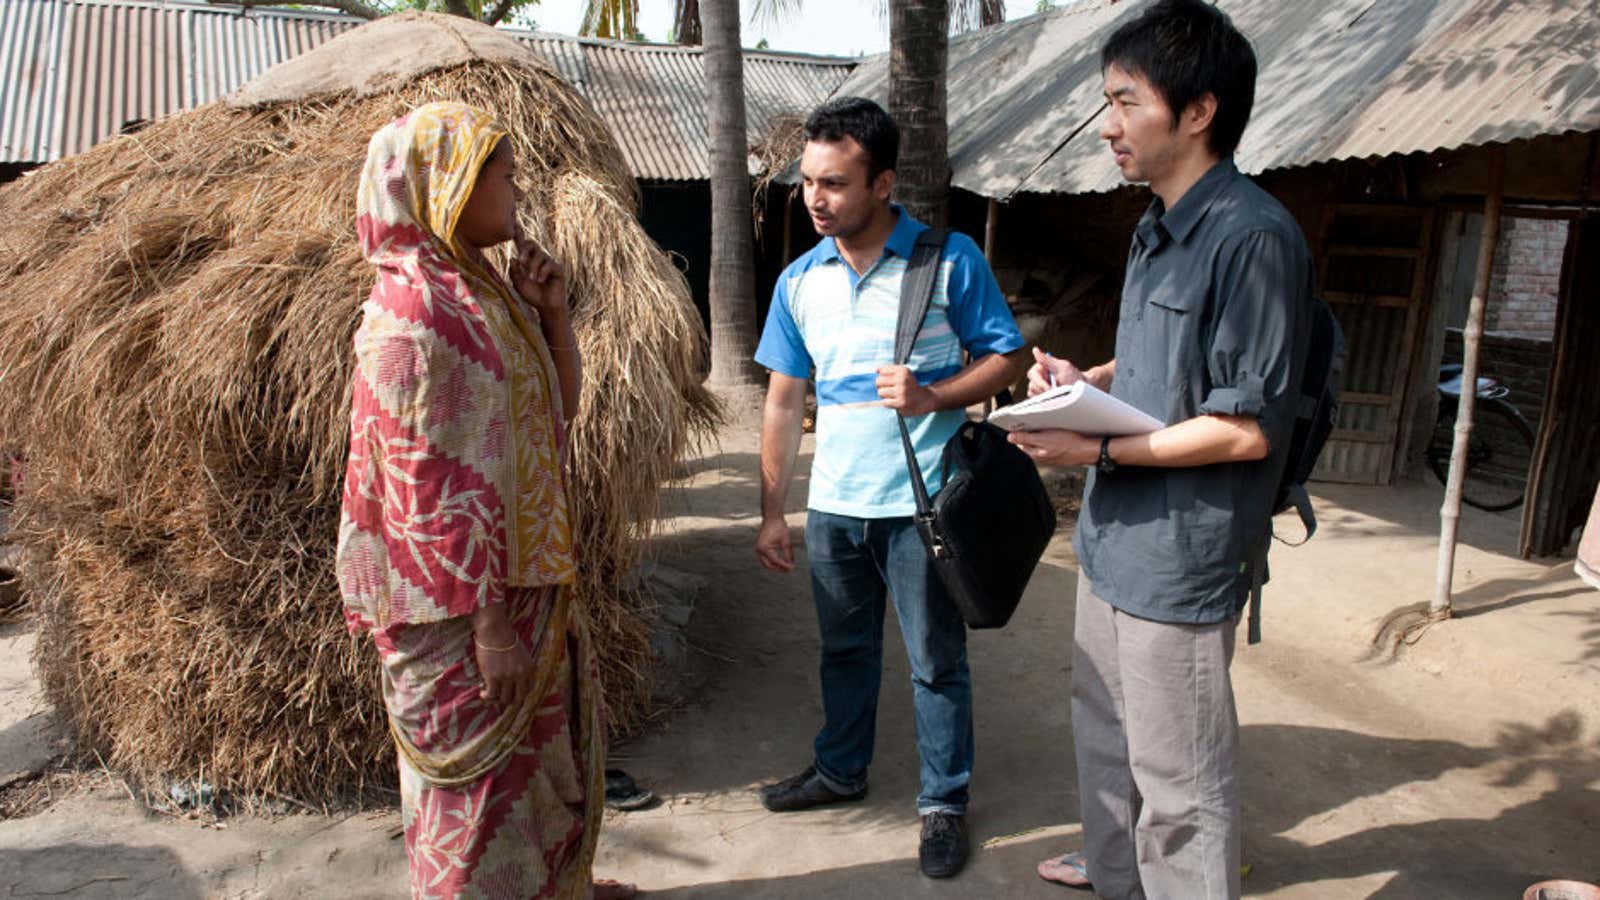 Designers consulted with Bangladeshi locals before developing the cheap toilet.